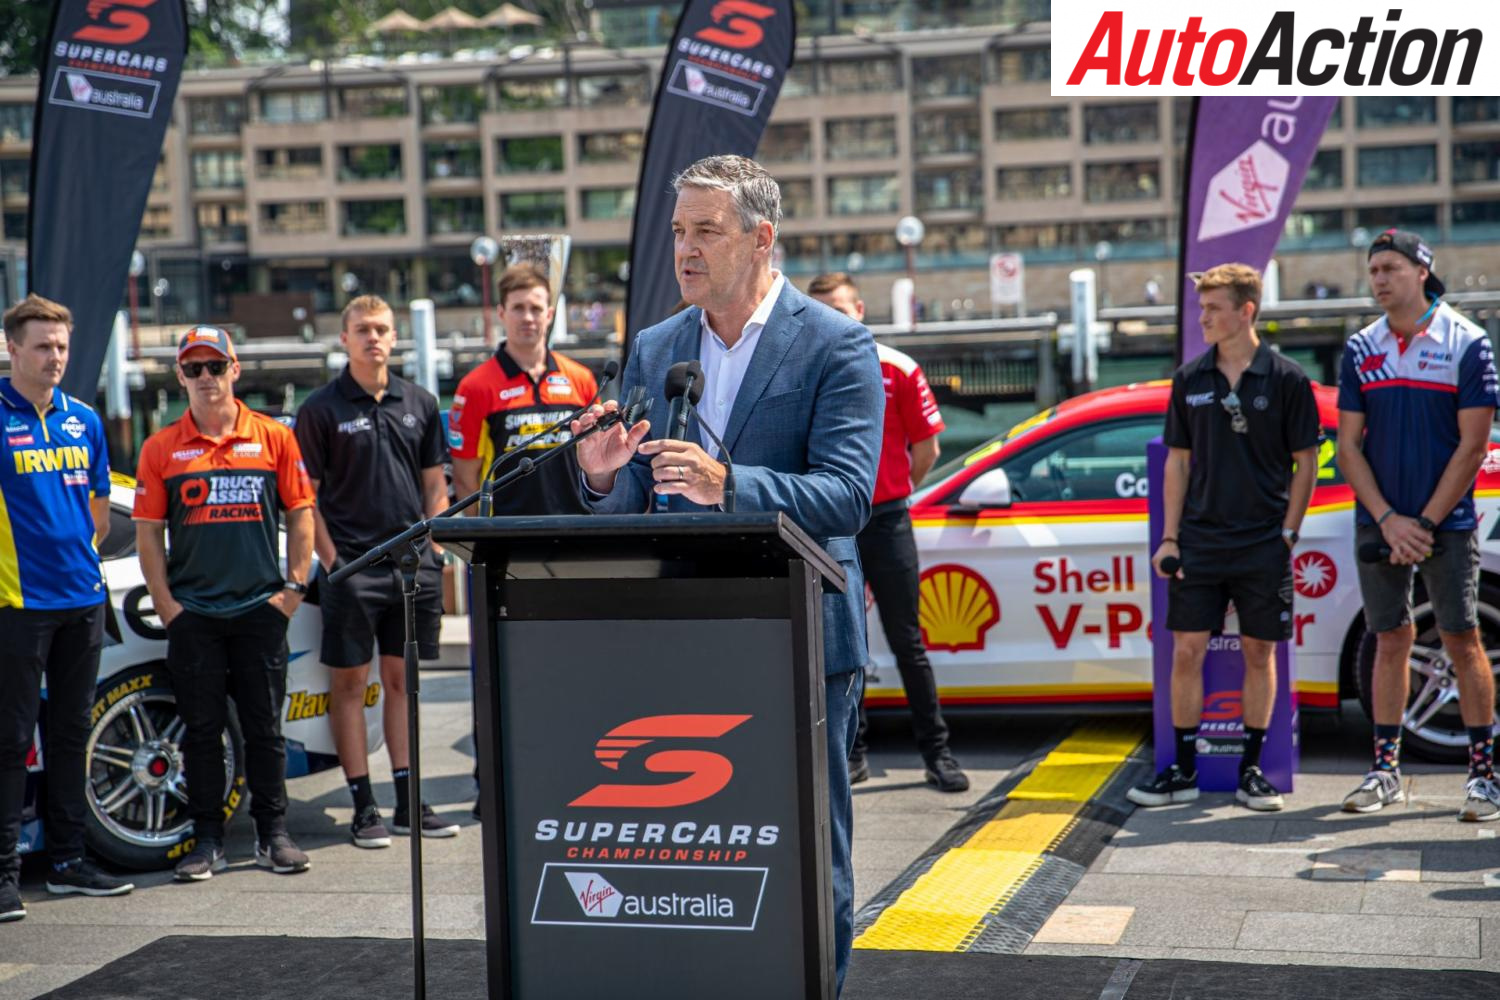 Crompo's quiet return to Supercars commission - Photo: InSyde Media